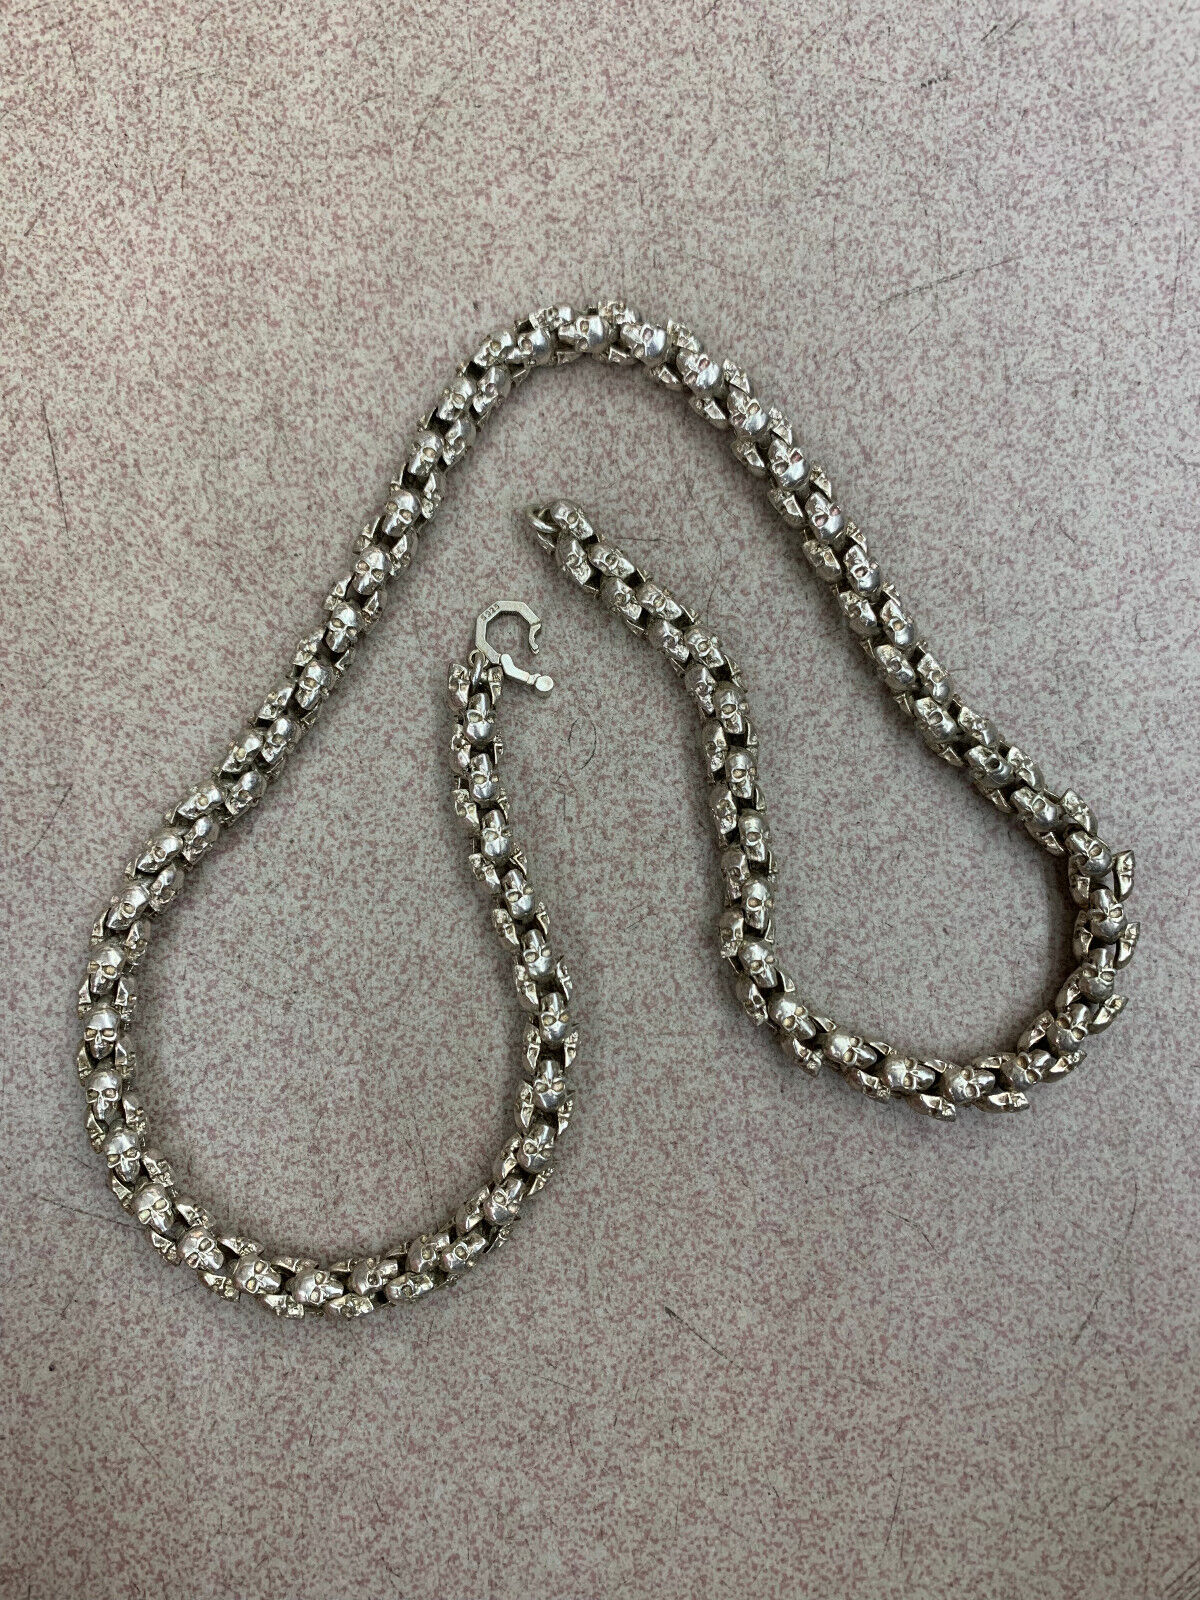 24 Inches Hand Made Tibetan Silver Skulls Amulet Necklace